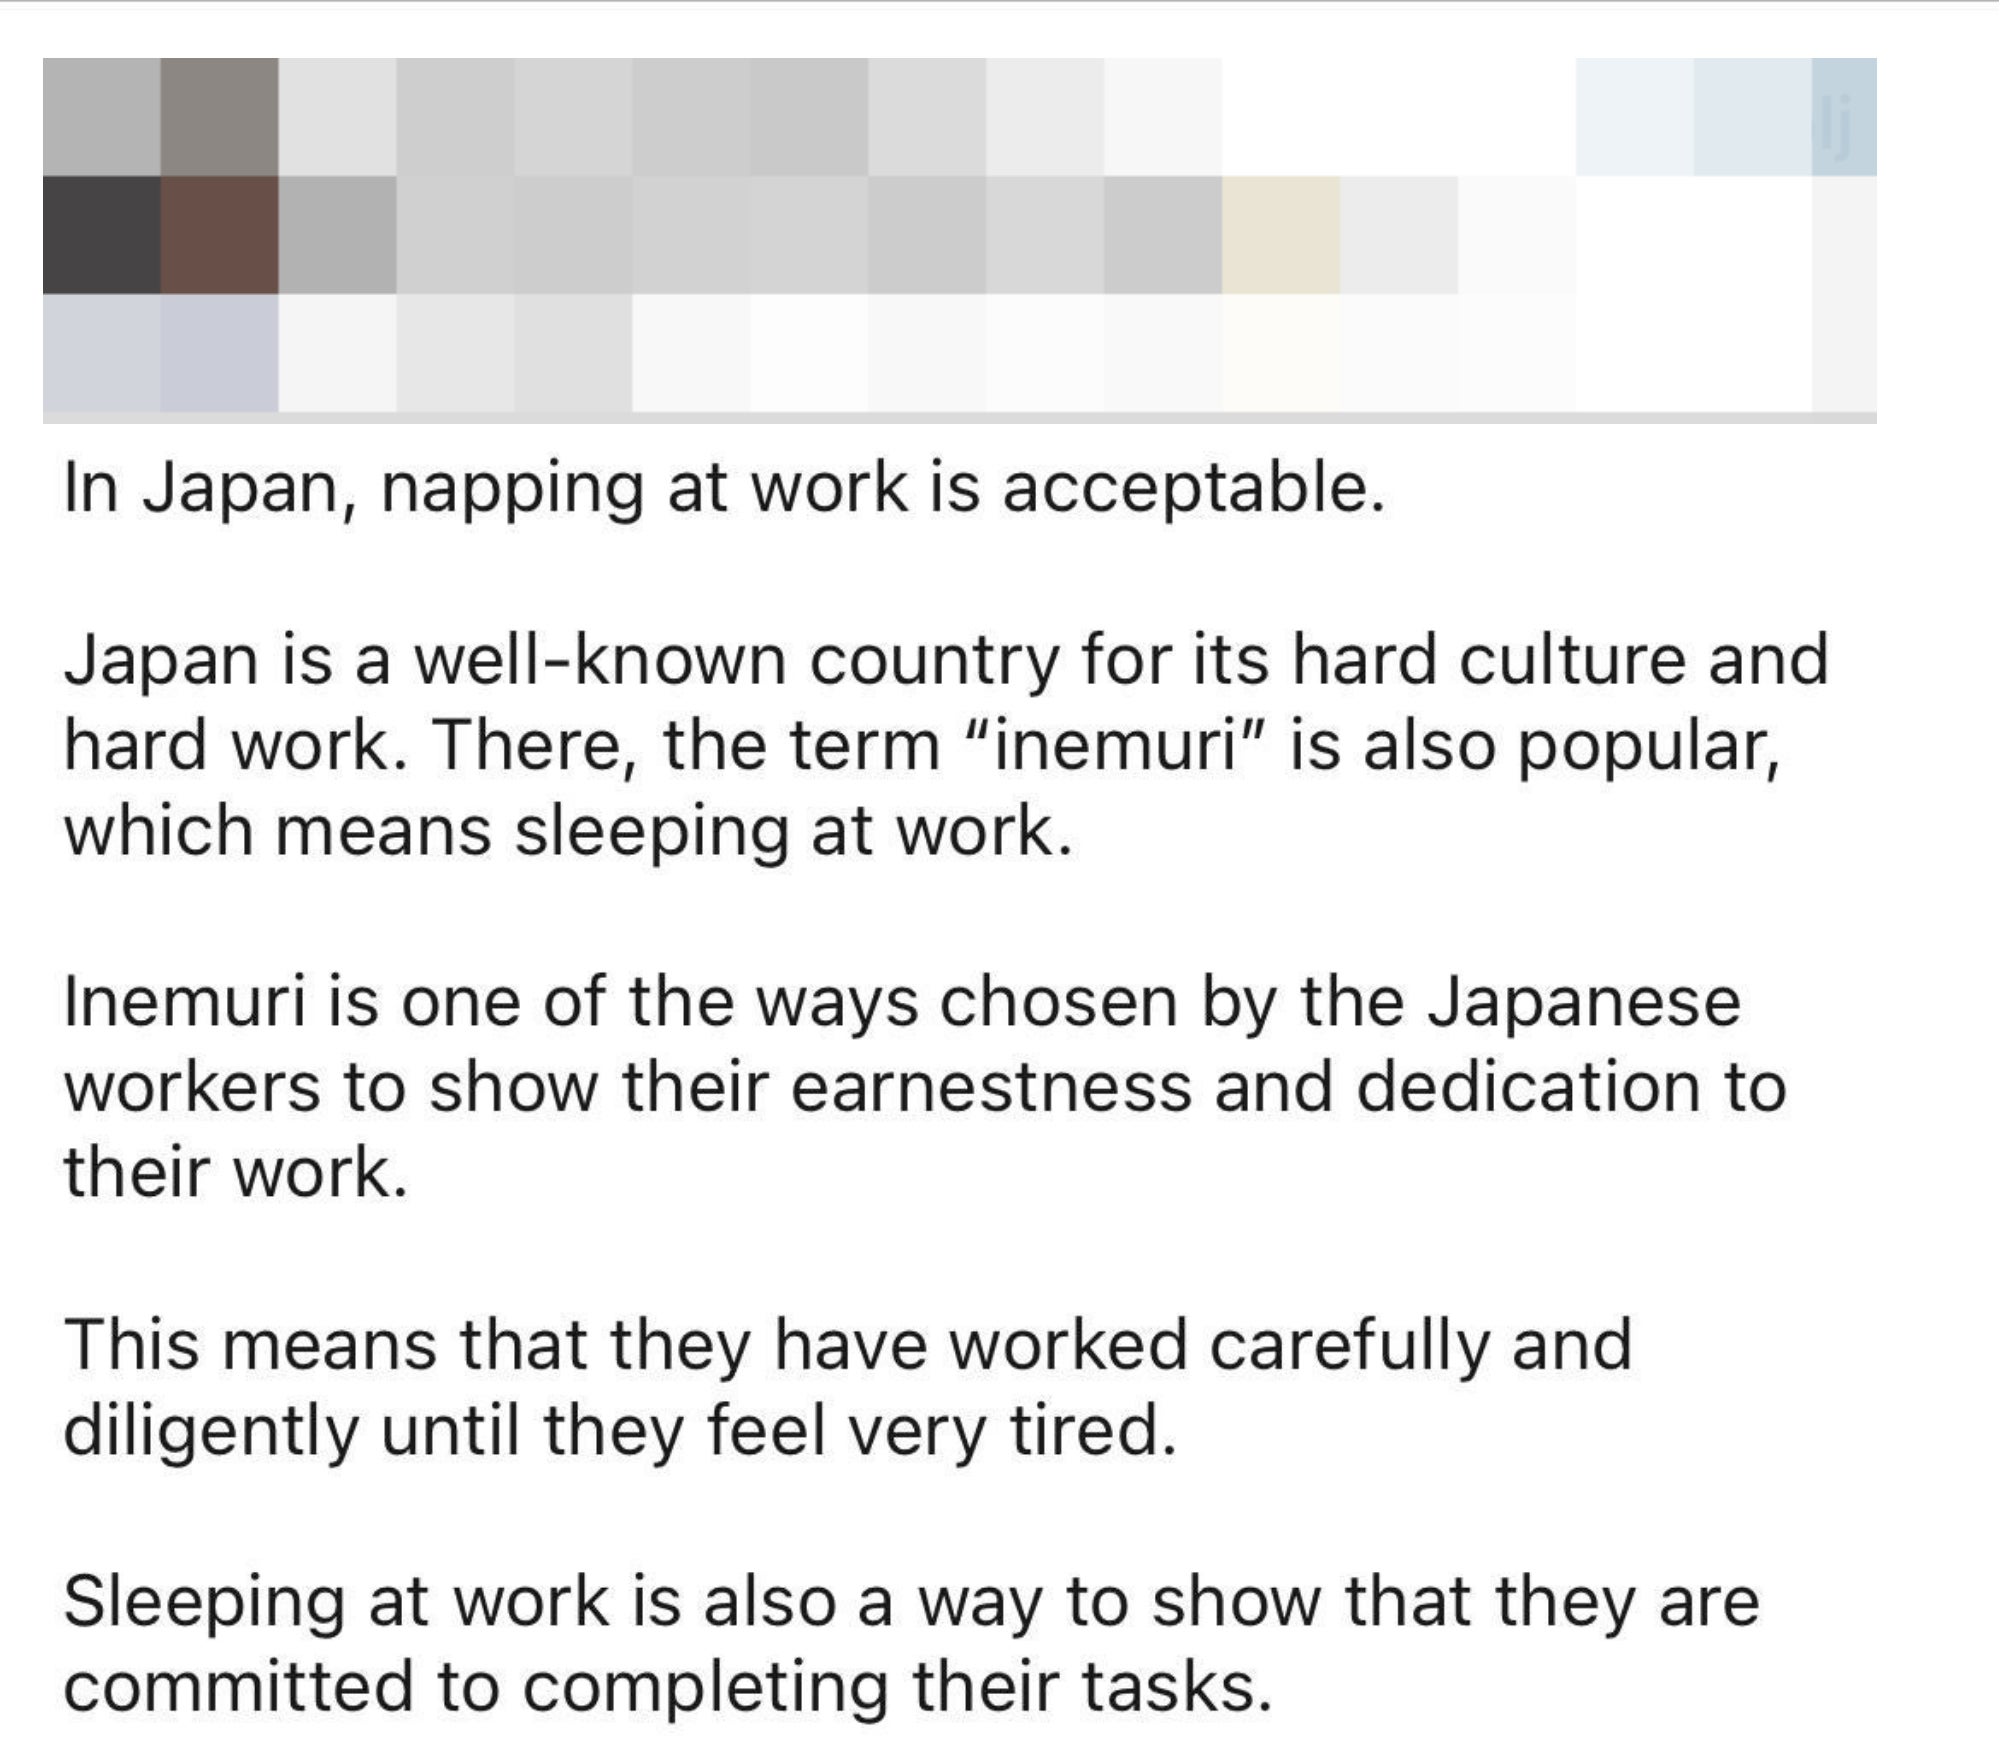 &quot;Sleeping at work is also a way to show that they are committed to completing their tasks.&quot;